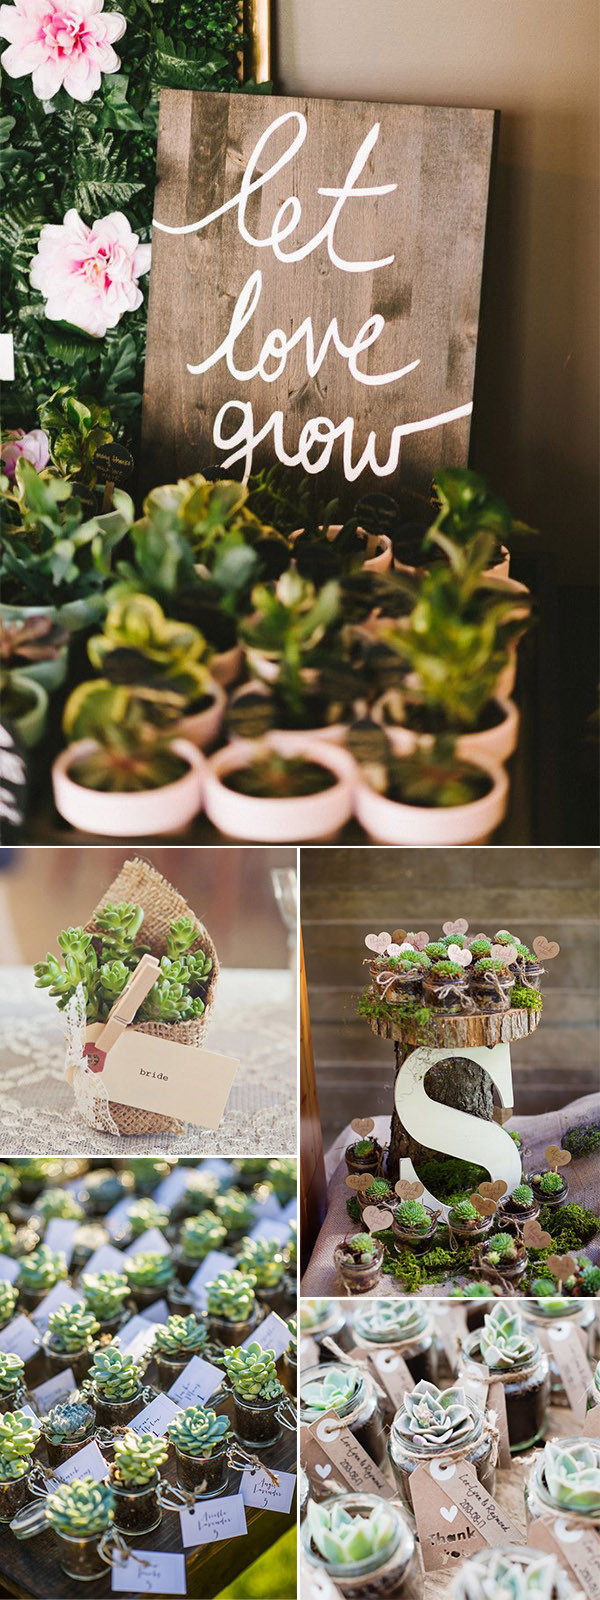 Succulents Wedding Favors
 46 Best Ideas to Incorporate Succulents into Your Weddings